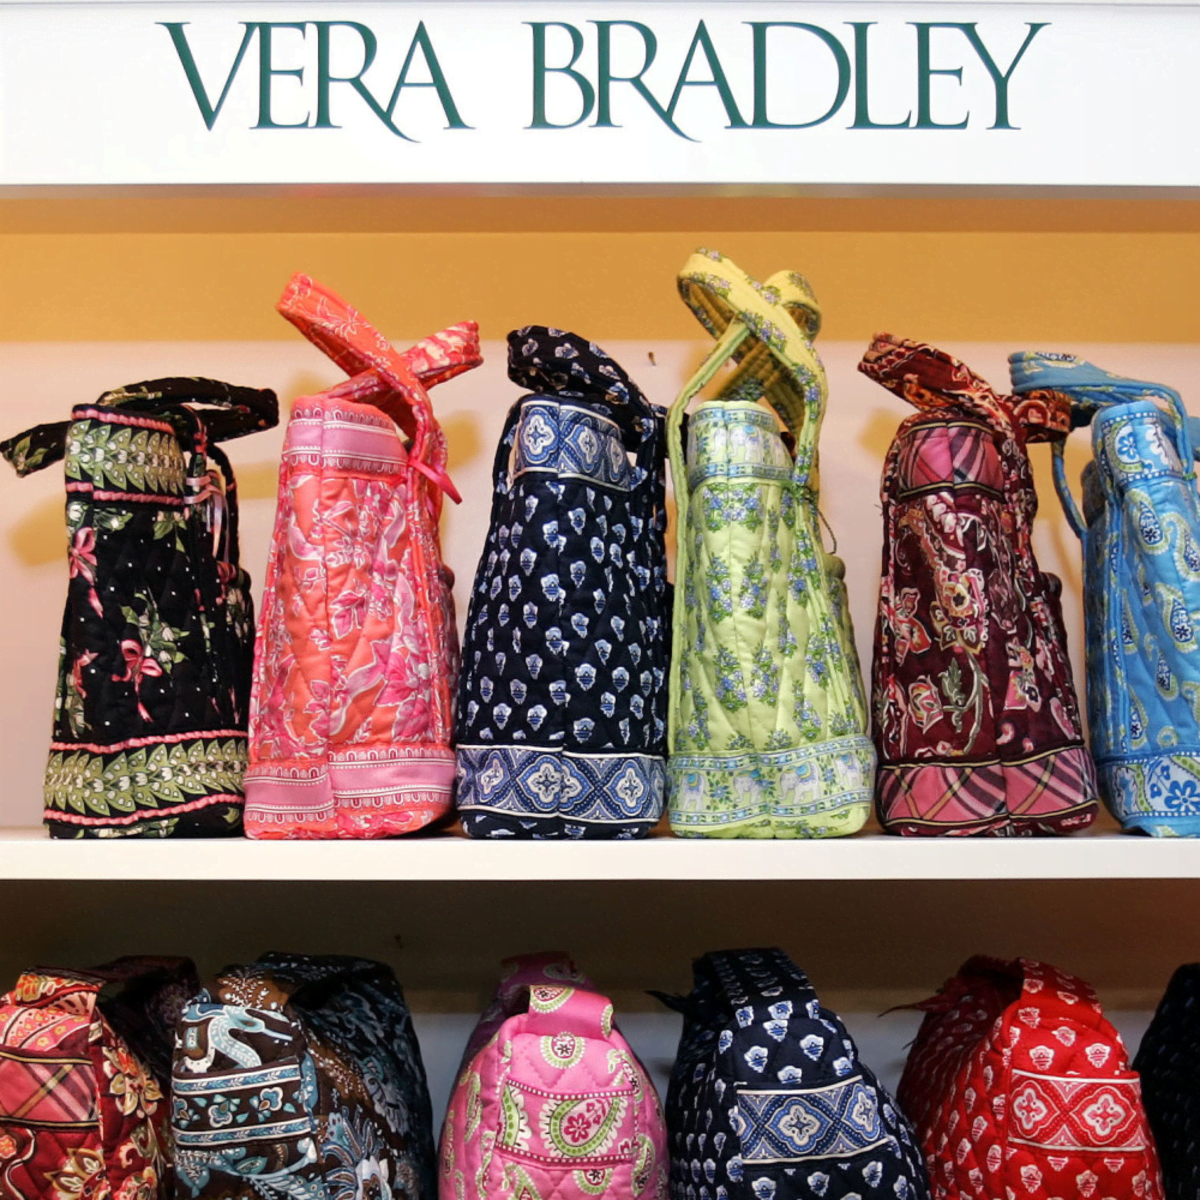 Vera Bradley: Save up to 30% on must-have handbags and accessories